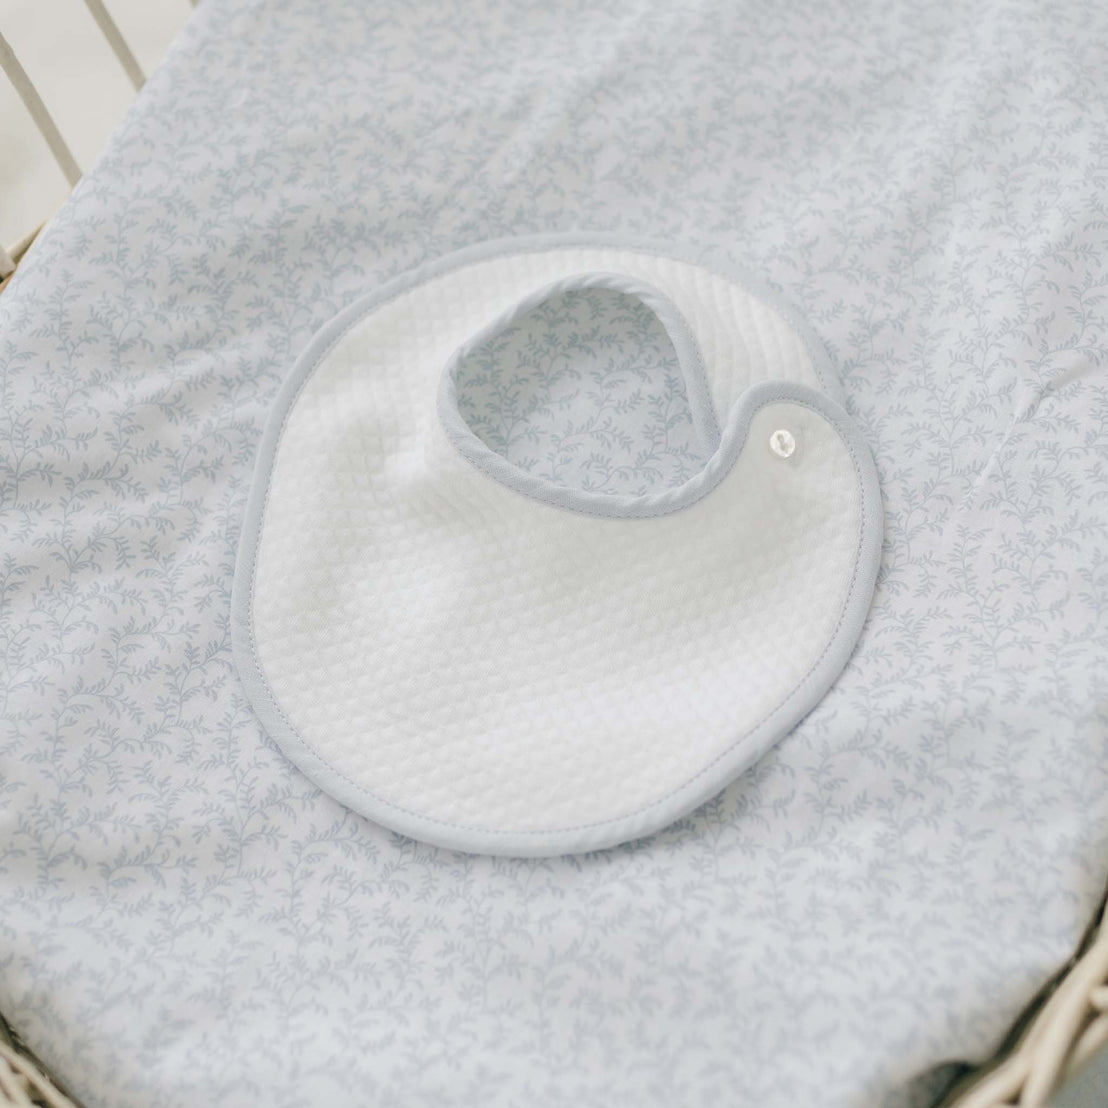 A Harrison Bib, featuring a white design with light blue trim, is laid on a light blue patterned baby blanket. This textured bib, perfect for complementing any heirloom baby outfit, is secured with a button. The cozy setup rests in what seems to be a crib or bassinet—making it an ideal component of a thoughtful baby shower gift set.